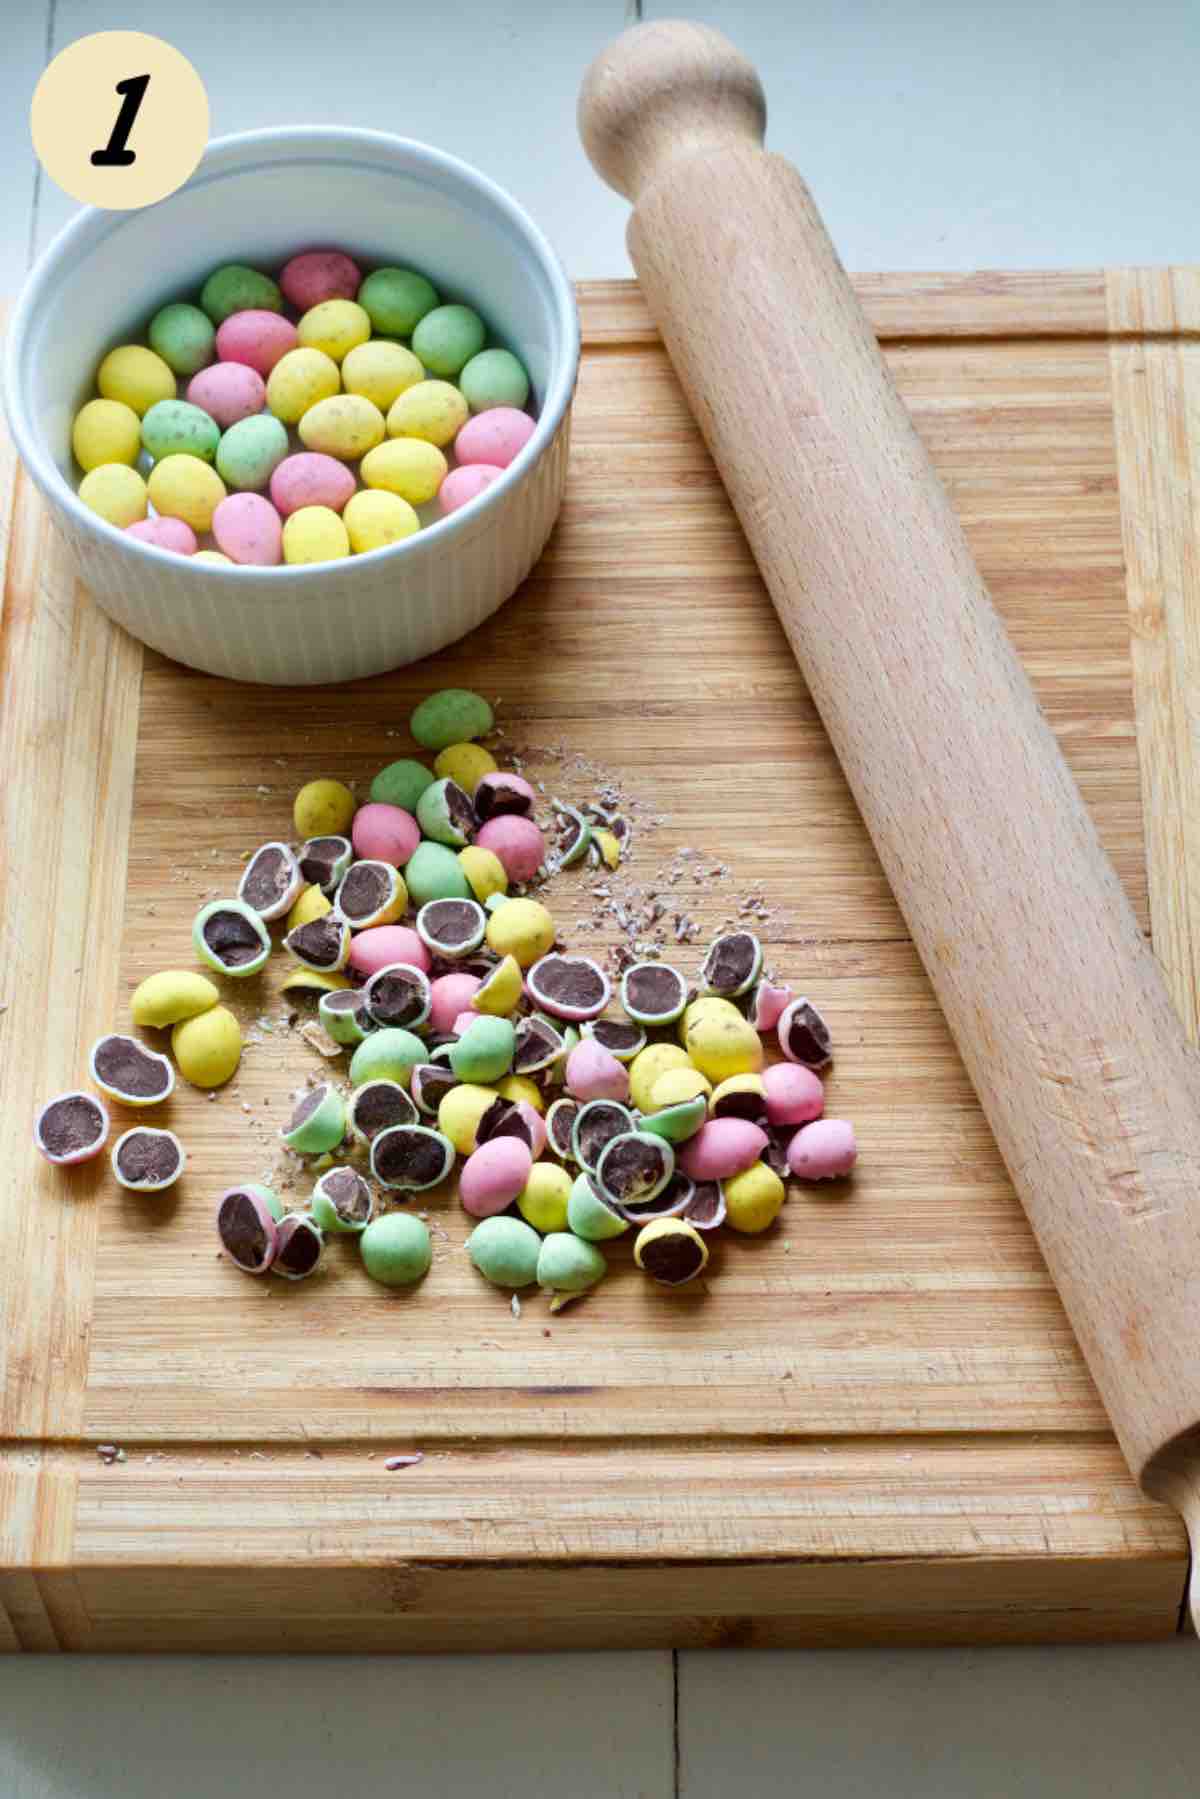 Crushed and whole mini eggs and rolling pin.